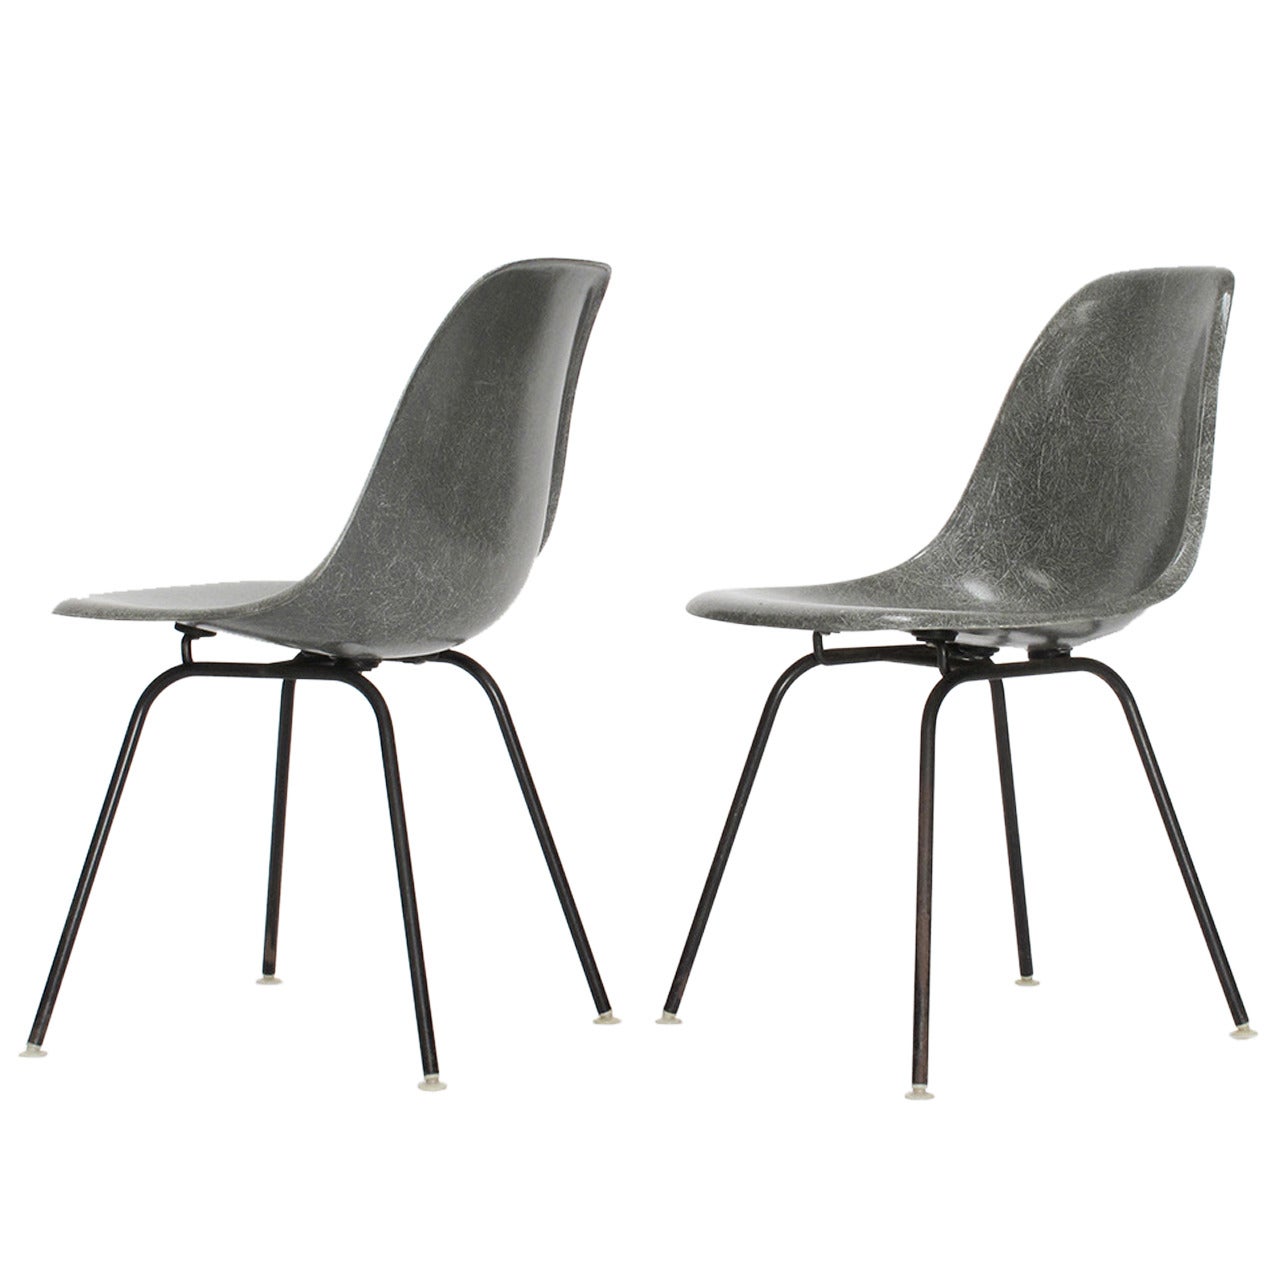 Pair of Charles and Ray Eames Fiberglass 'Shell' Chairs, 1960s For Sale